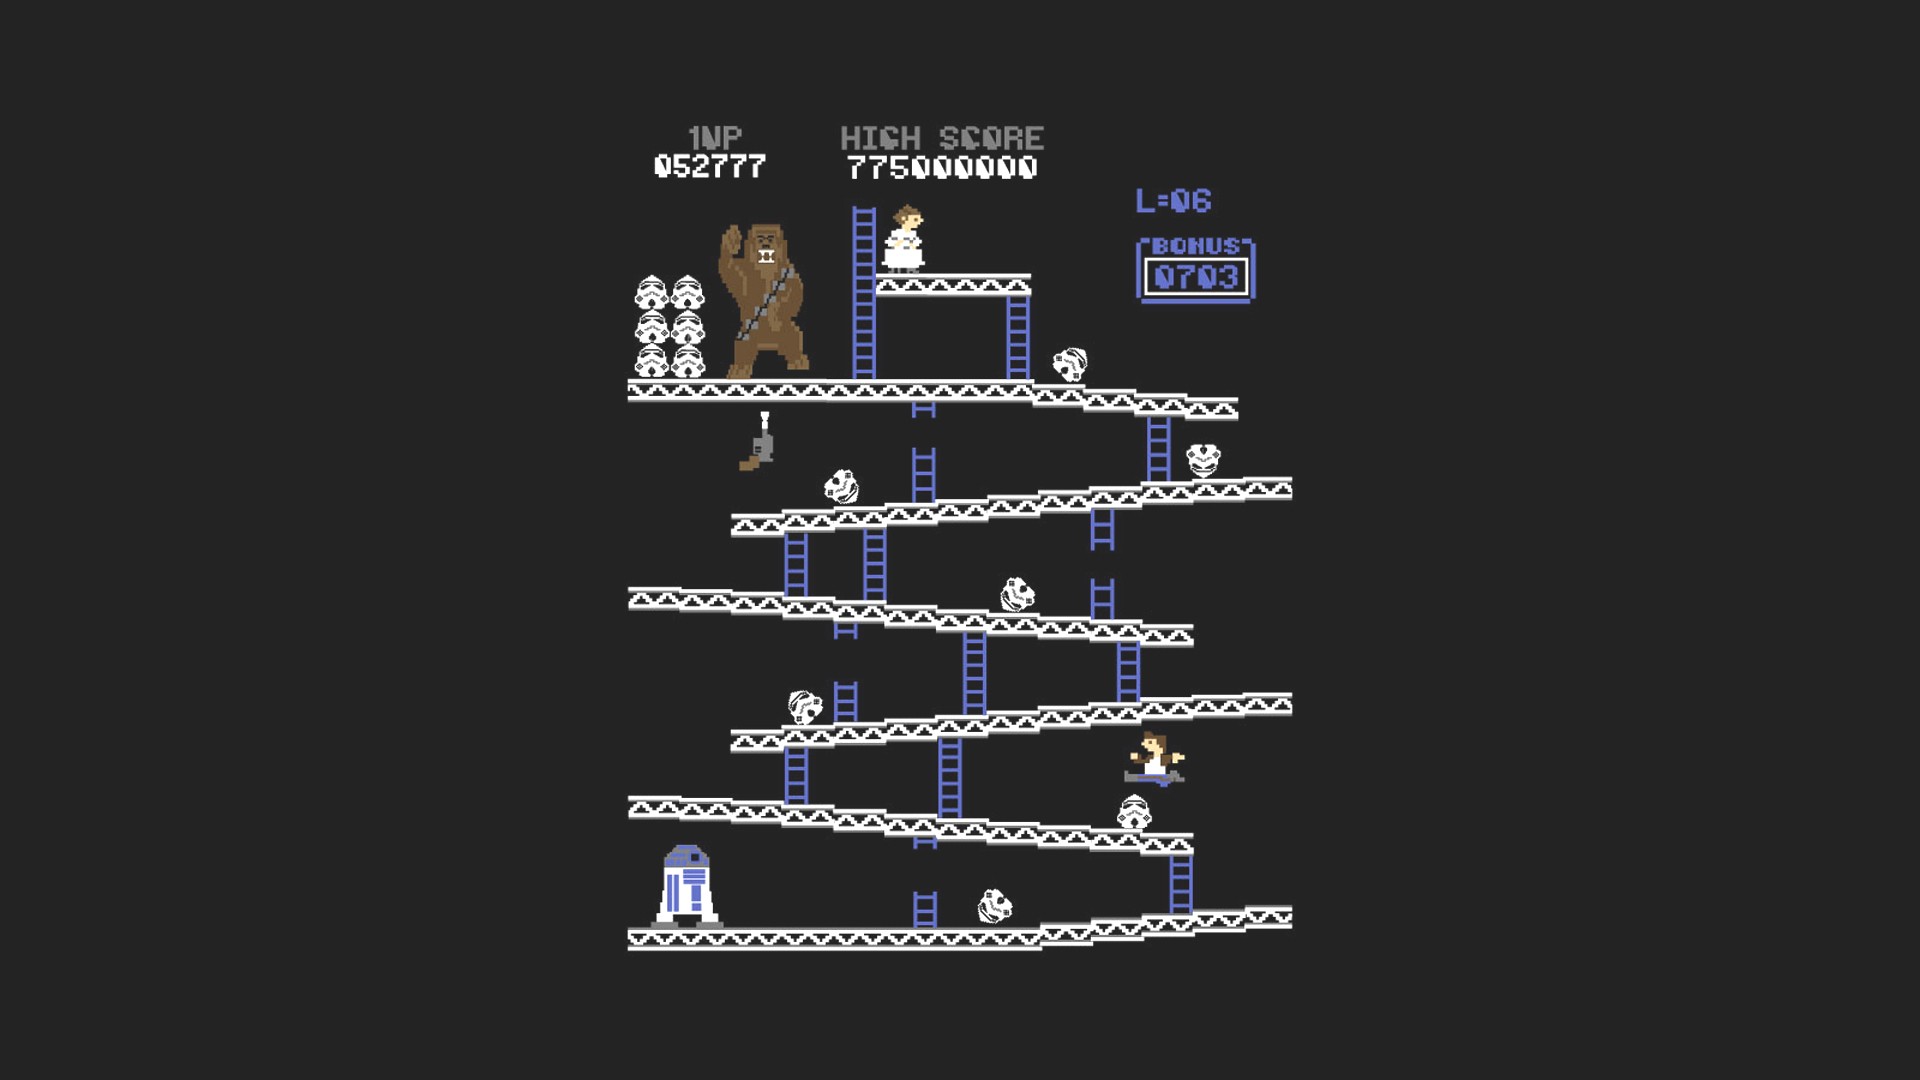 General 1920x1080 video games Star Wars Donkey Kong retro games R2-D2 Leia Organa Chewbacca Han Solo crossover video game art